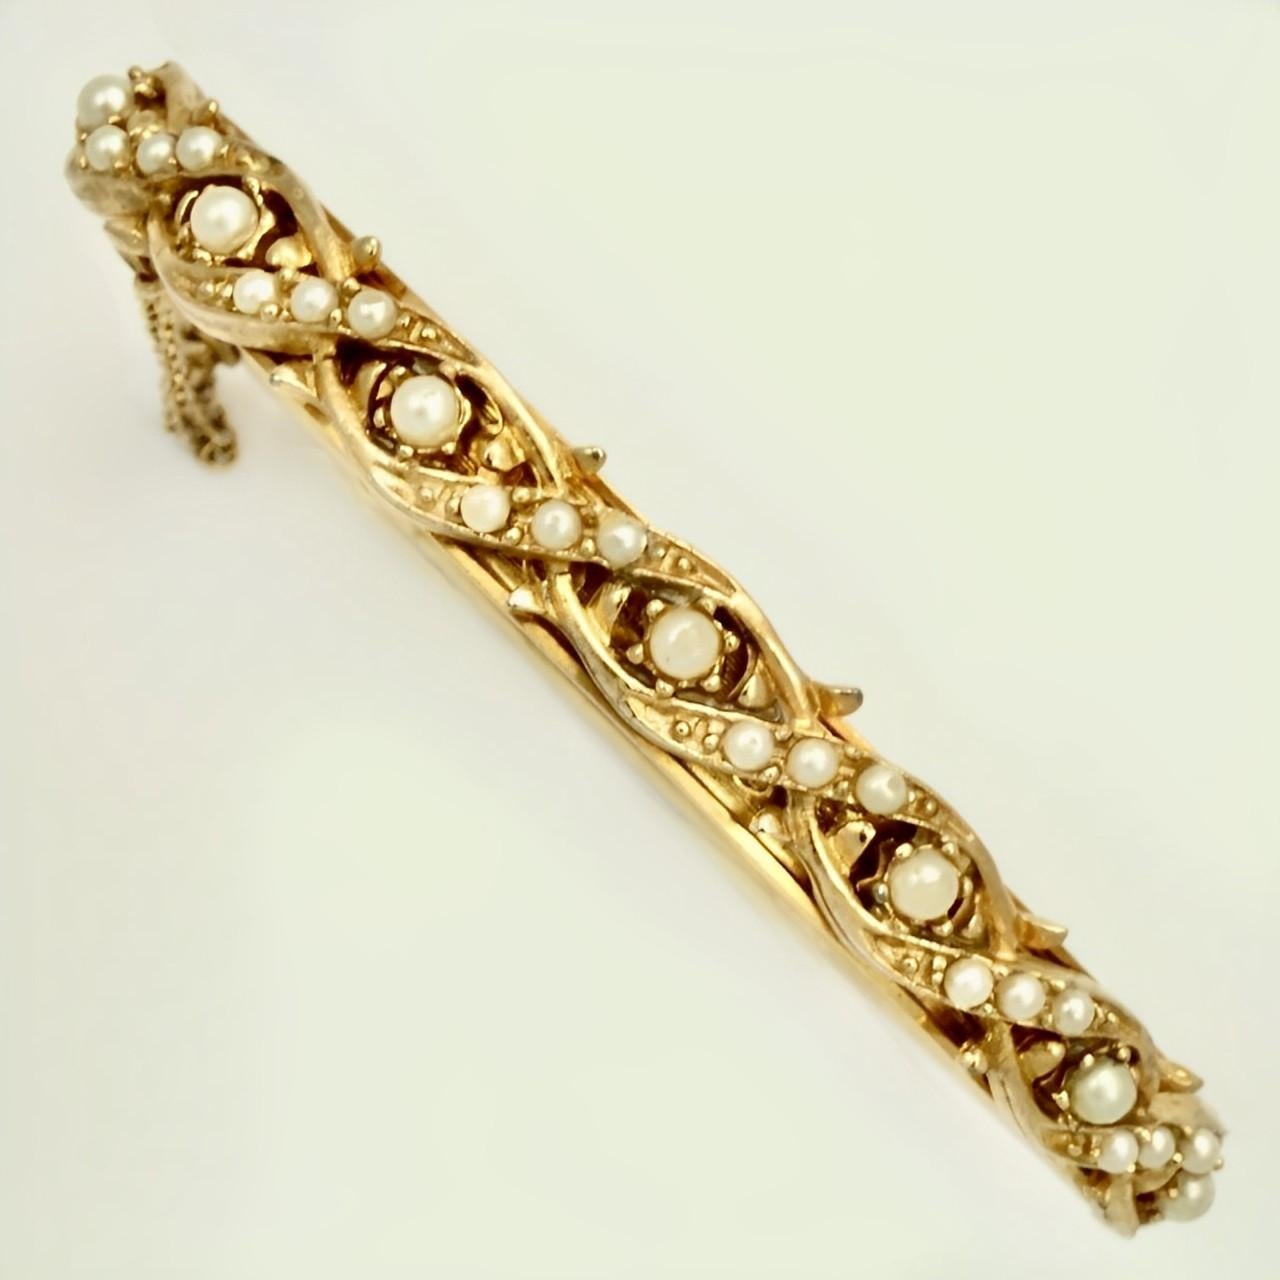 Beautiful gold plated bracelet featuring an ornate faux pearl design to the front, and a floral design to the back. There is a safety chain. Measuring inside length diameter 6.5 cm / 2.5 inches by width diameter 4.9 cm / 1.9 inch, and width 7 mm /